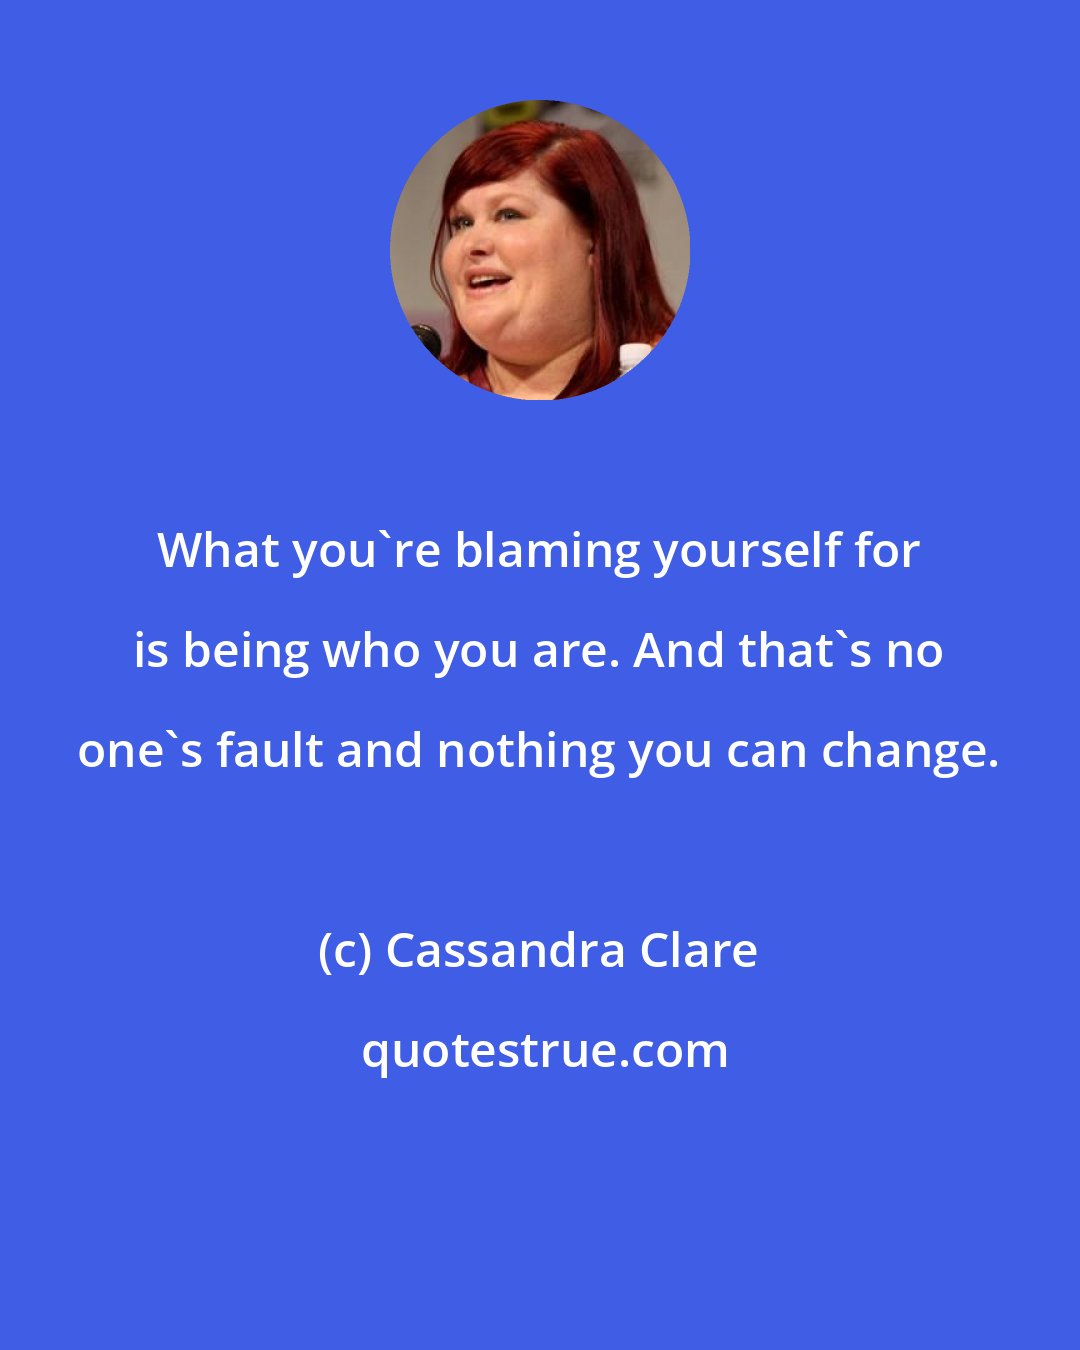 Cassandra Clare: What you're blaming yourself for is being who you are. And that's no one's fault and nothing you can change.